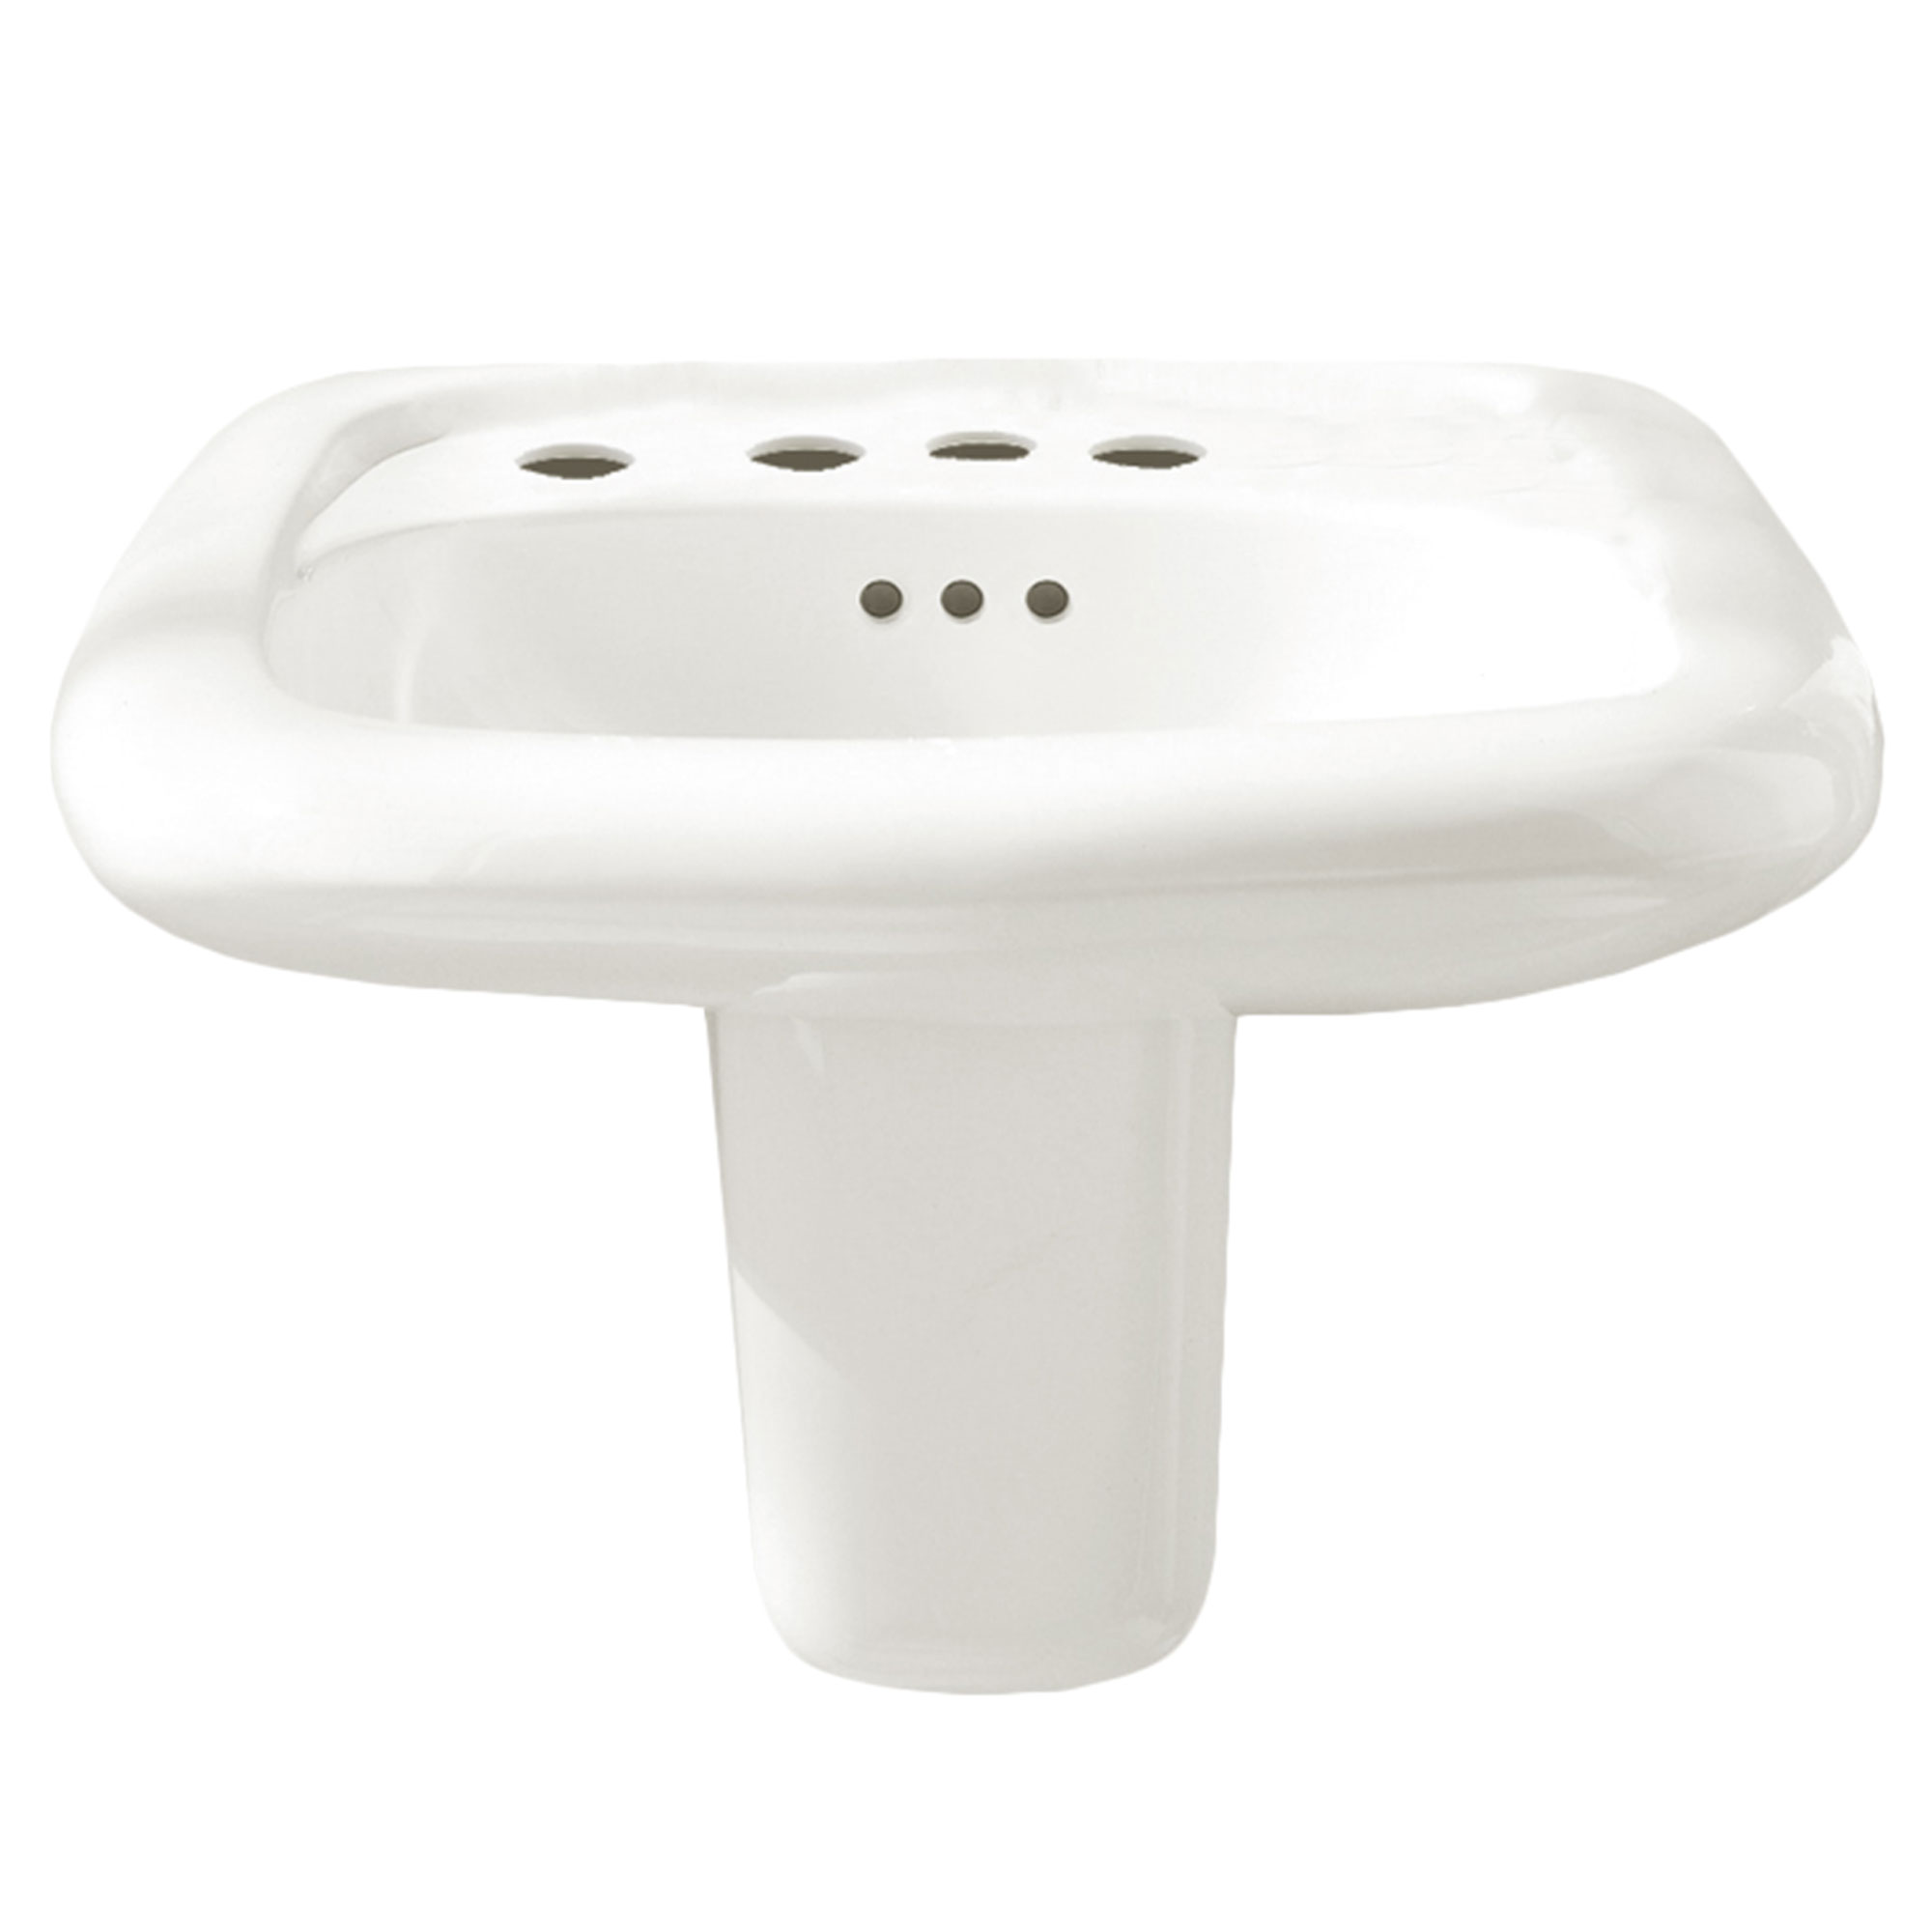 Murro 21-1/4x20-1/2" Wall-Hung Lav Sink in White w/4" Faucet Holes